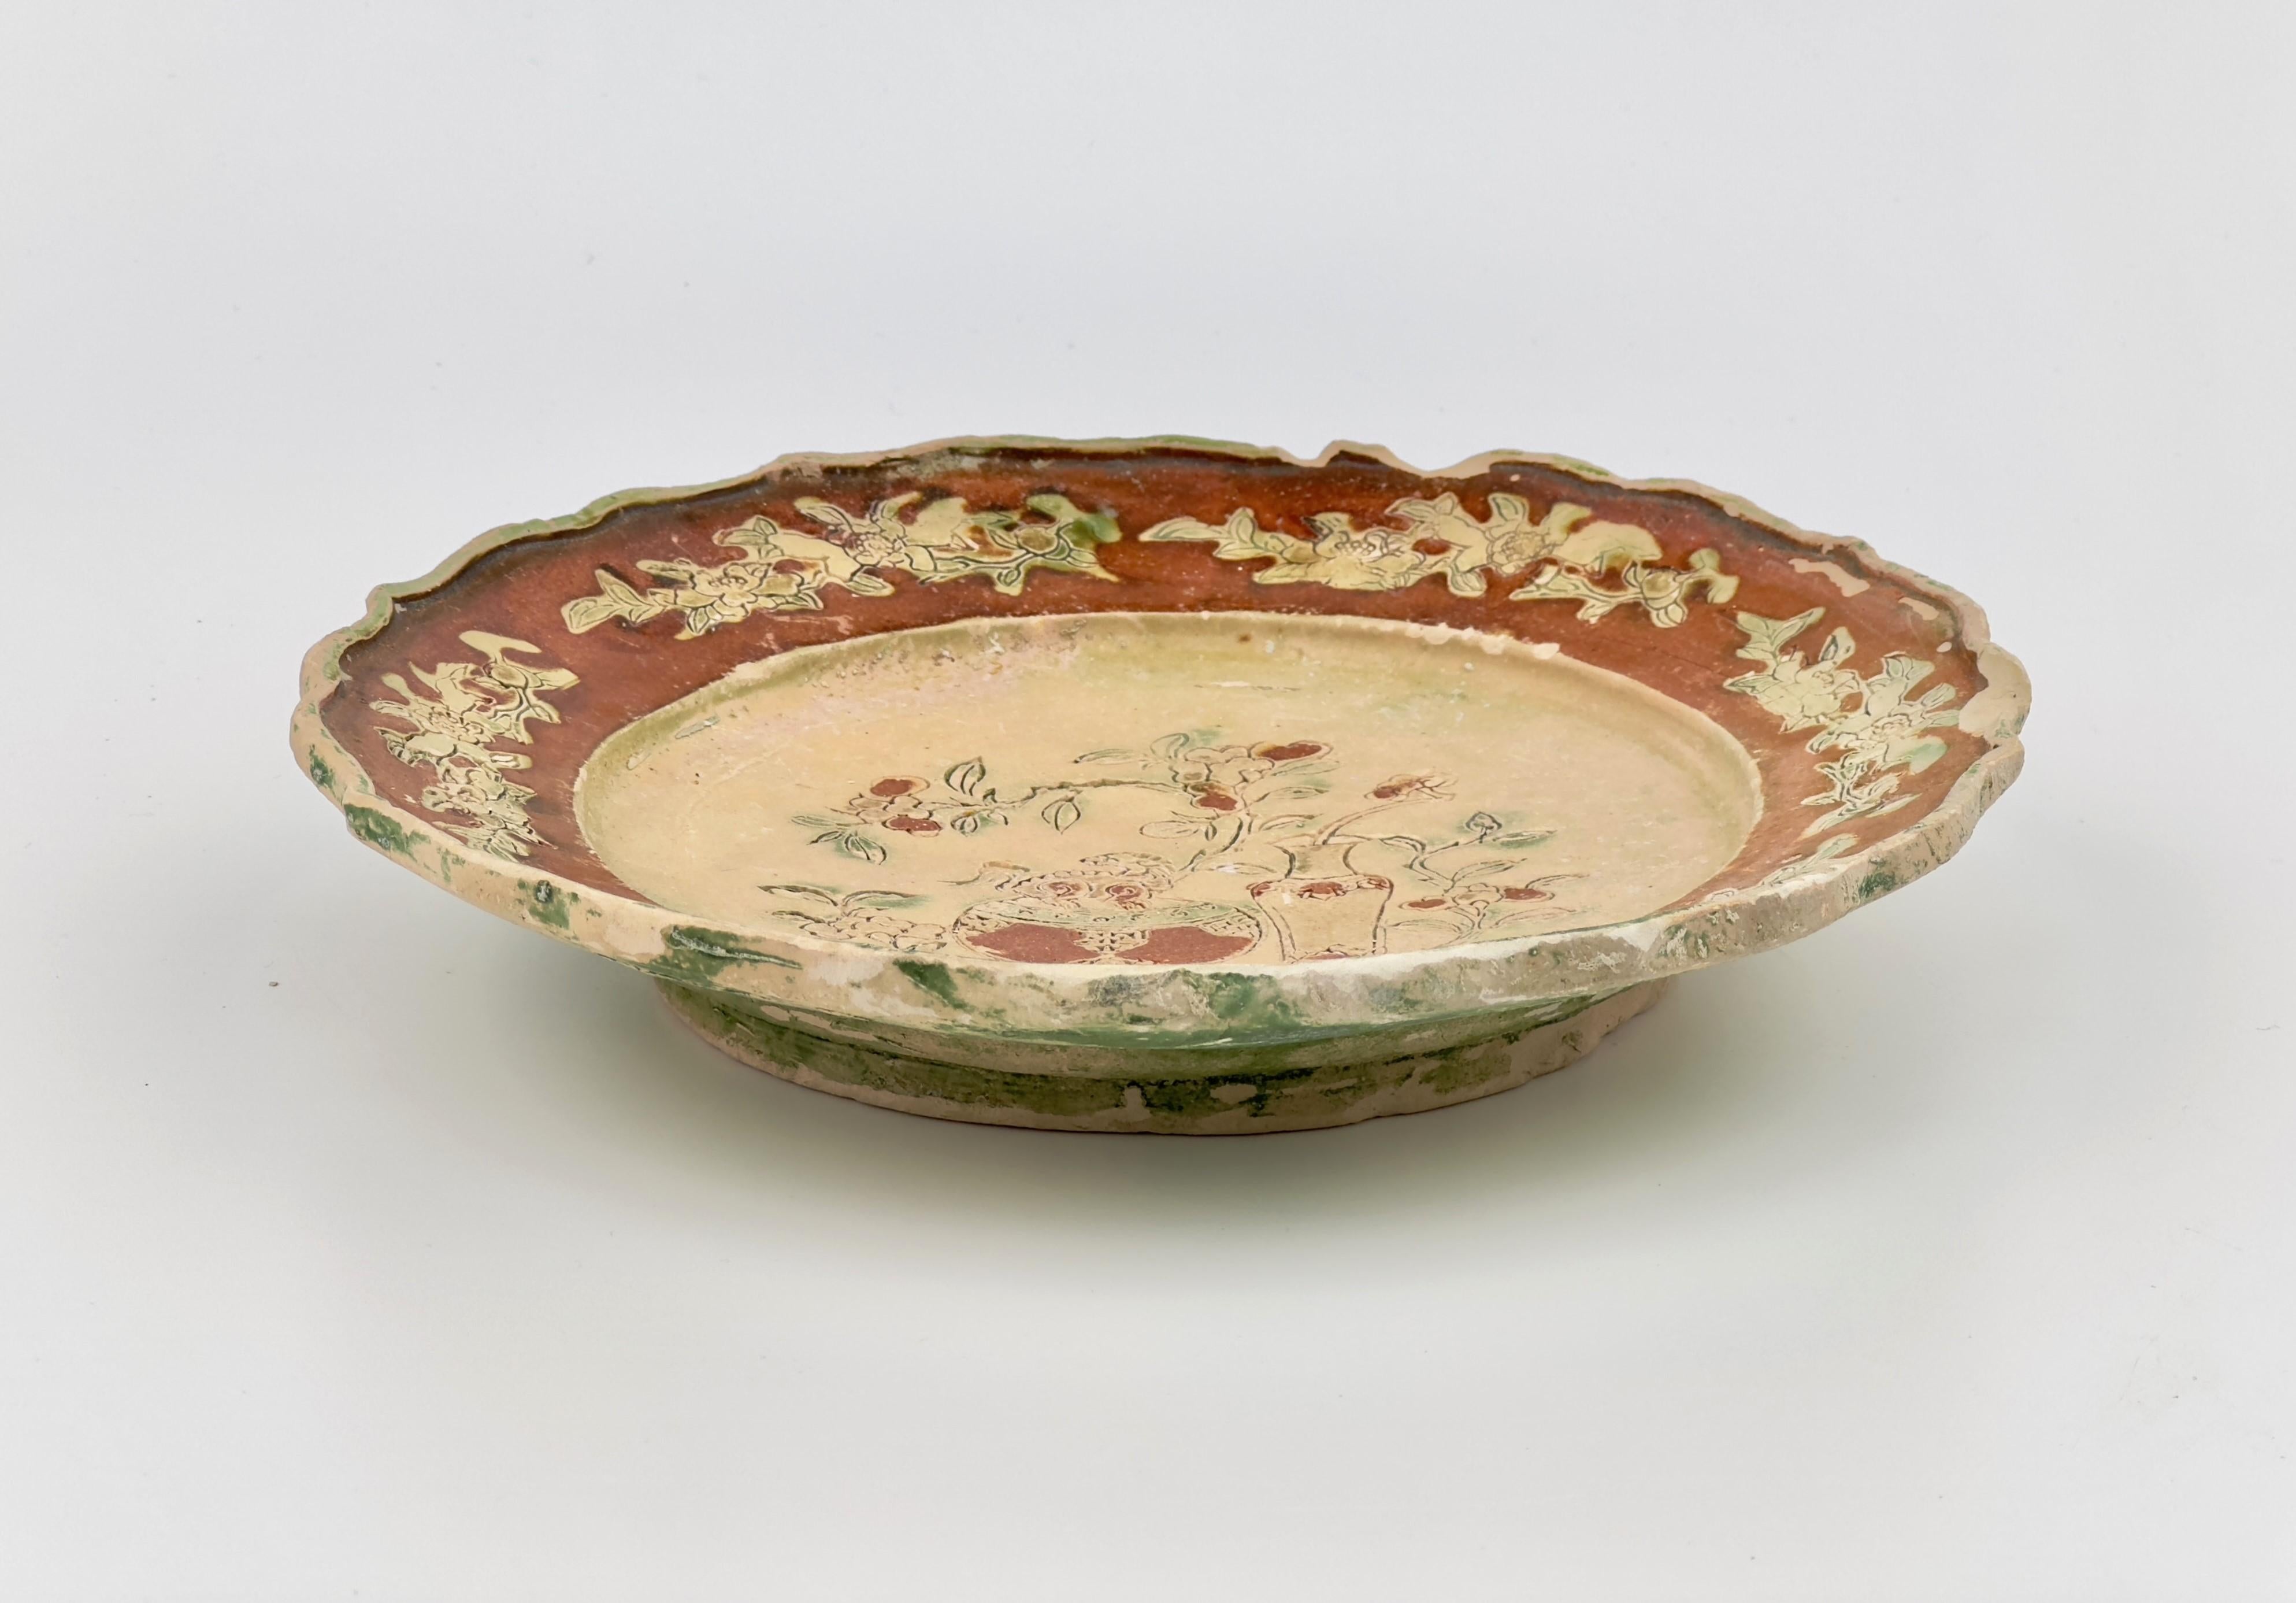 Chinese Three-glazed Earthenware dish circa 1725, Qing Dynasty, Yongzheng Reign For Sale